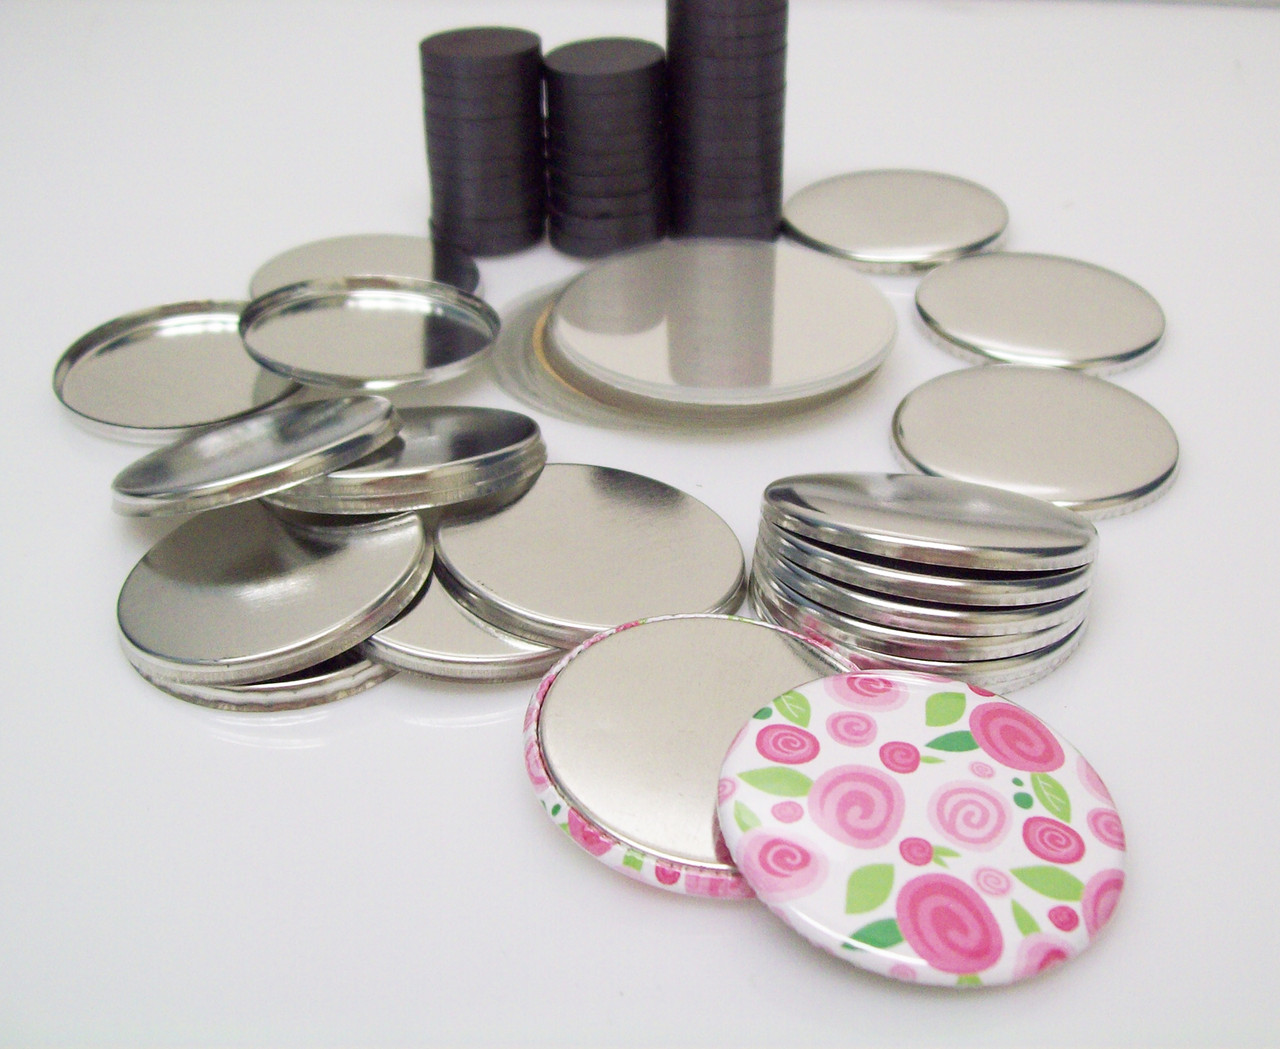 1 Inch Round Rubber Peel & Stick Magnets ONLY - NOT for 1 Buttons - 250